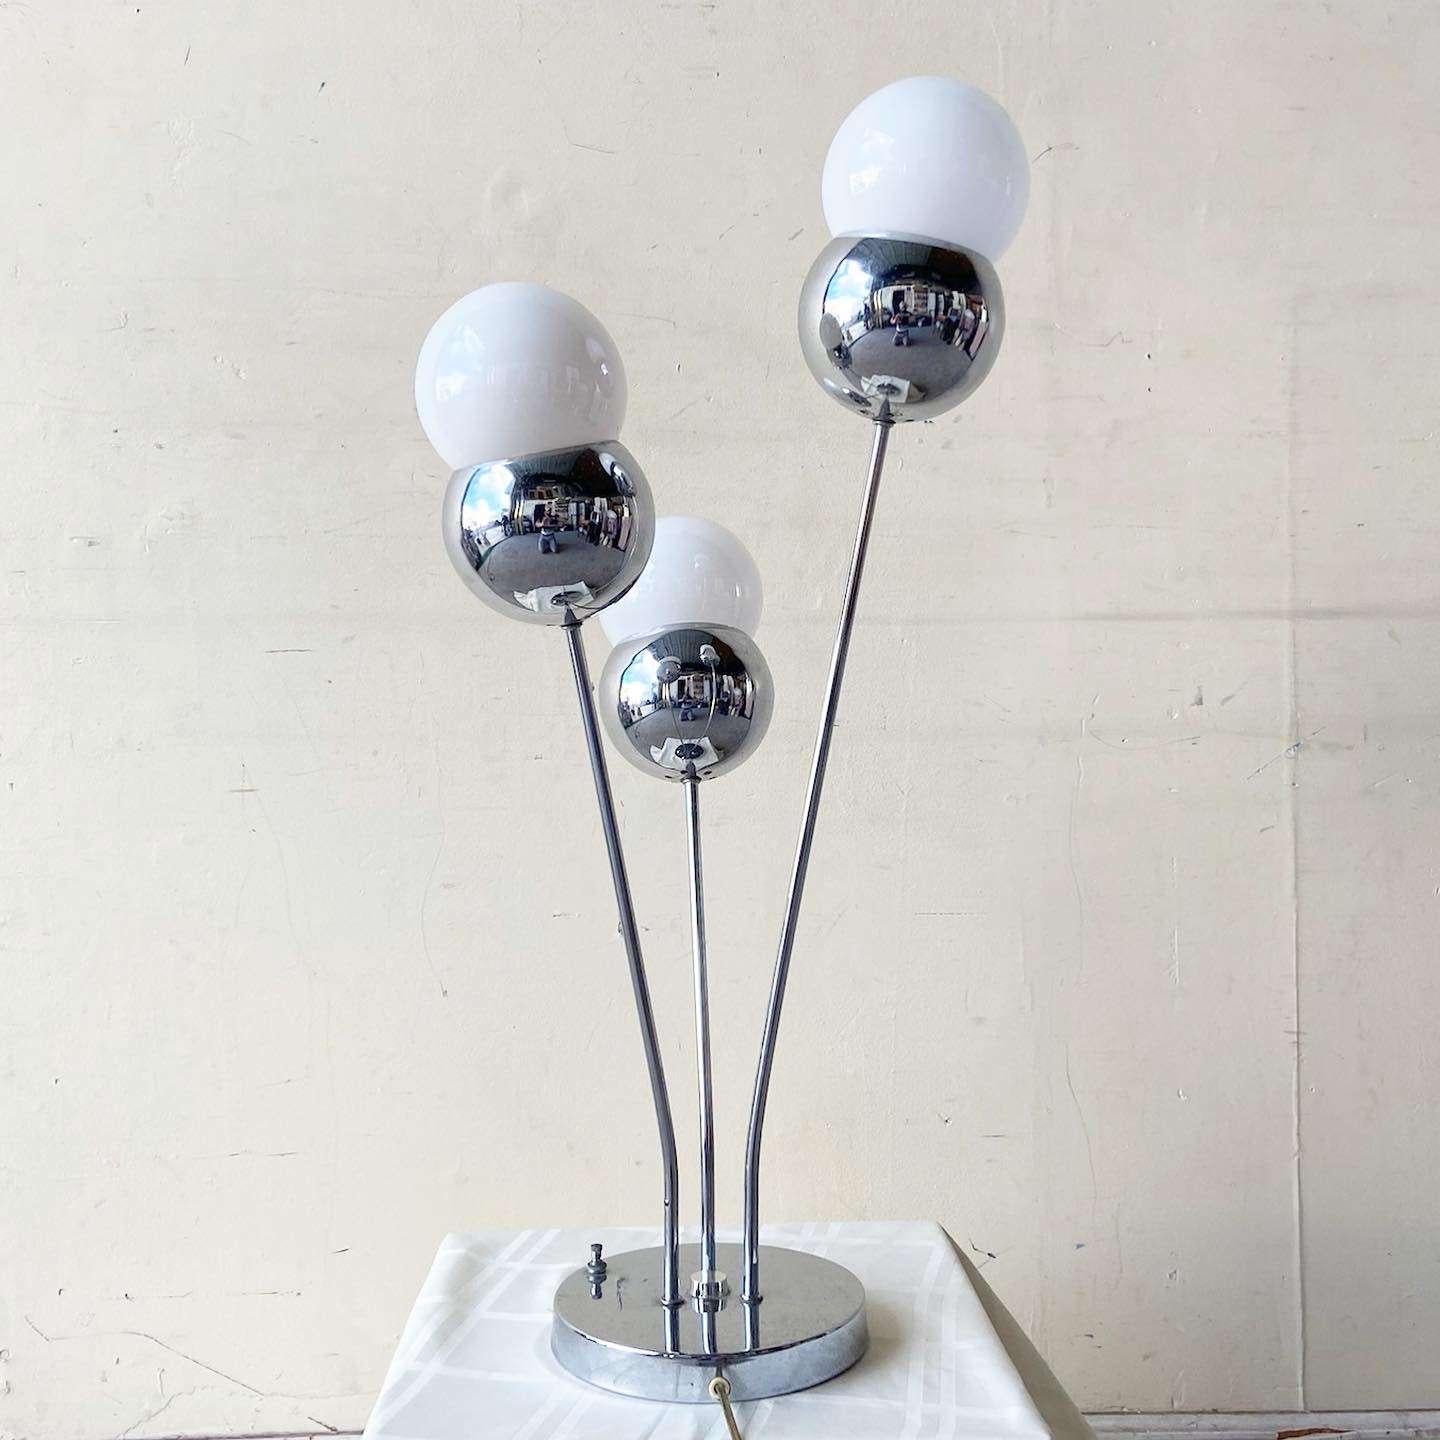 Exceptional mid century modern space age table lamp in the style of Robert Sonneman. Features a chrome finish with a bulbous fixture for larger lightbulbs as is meant to be displayed.
